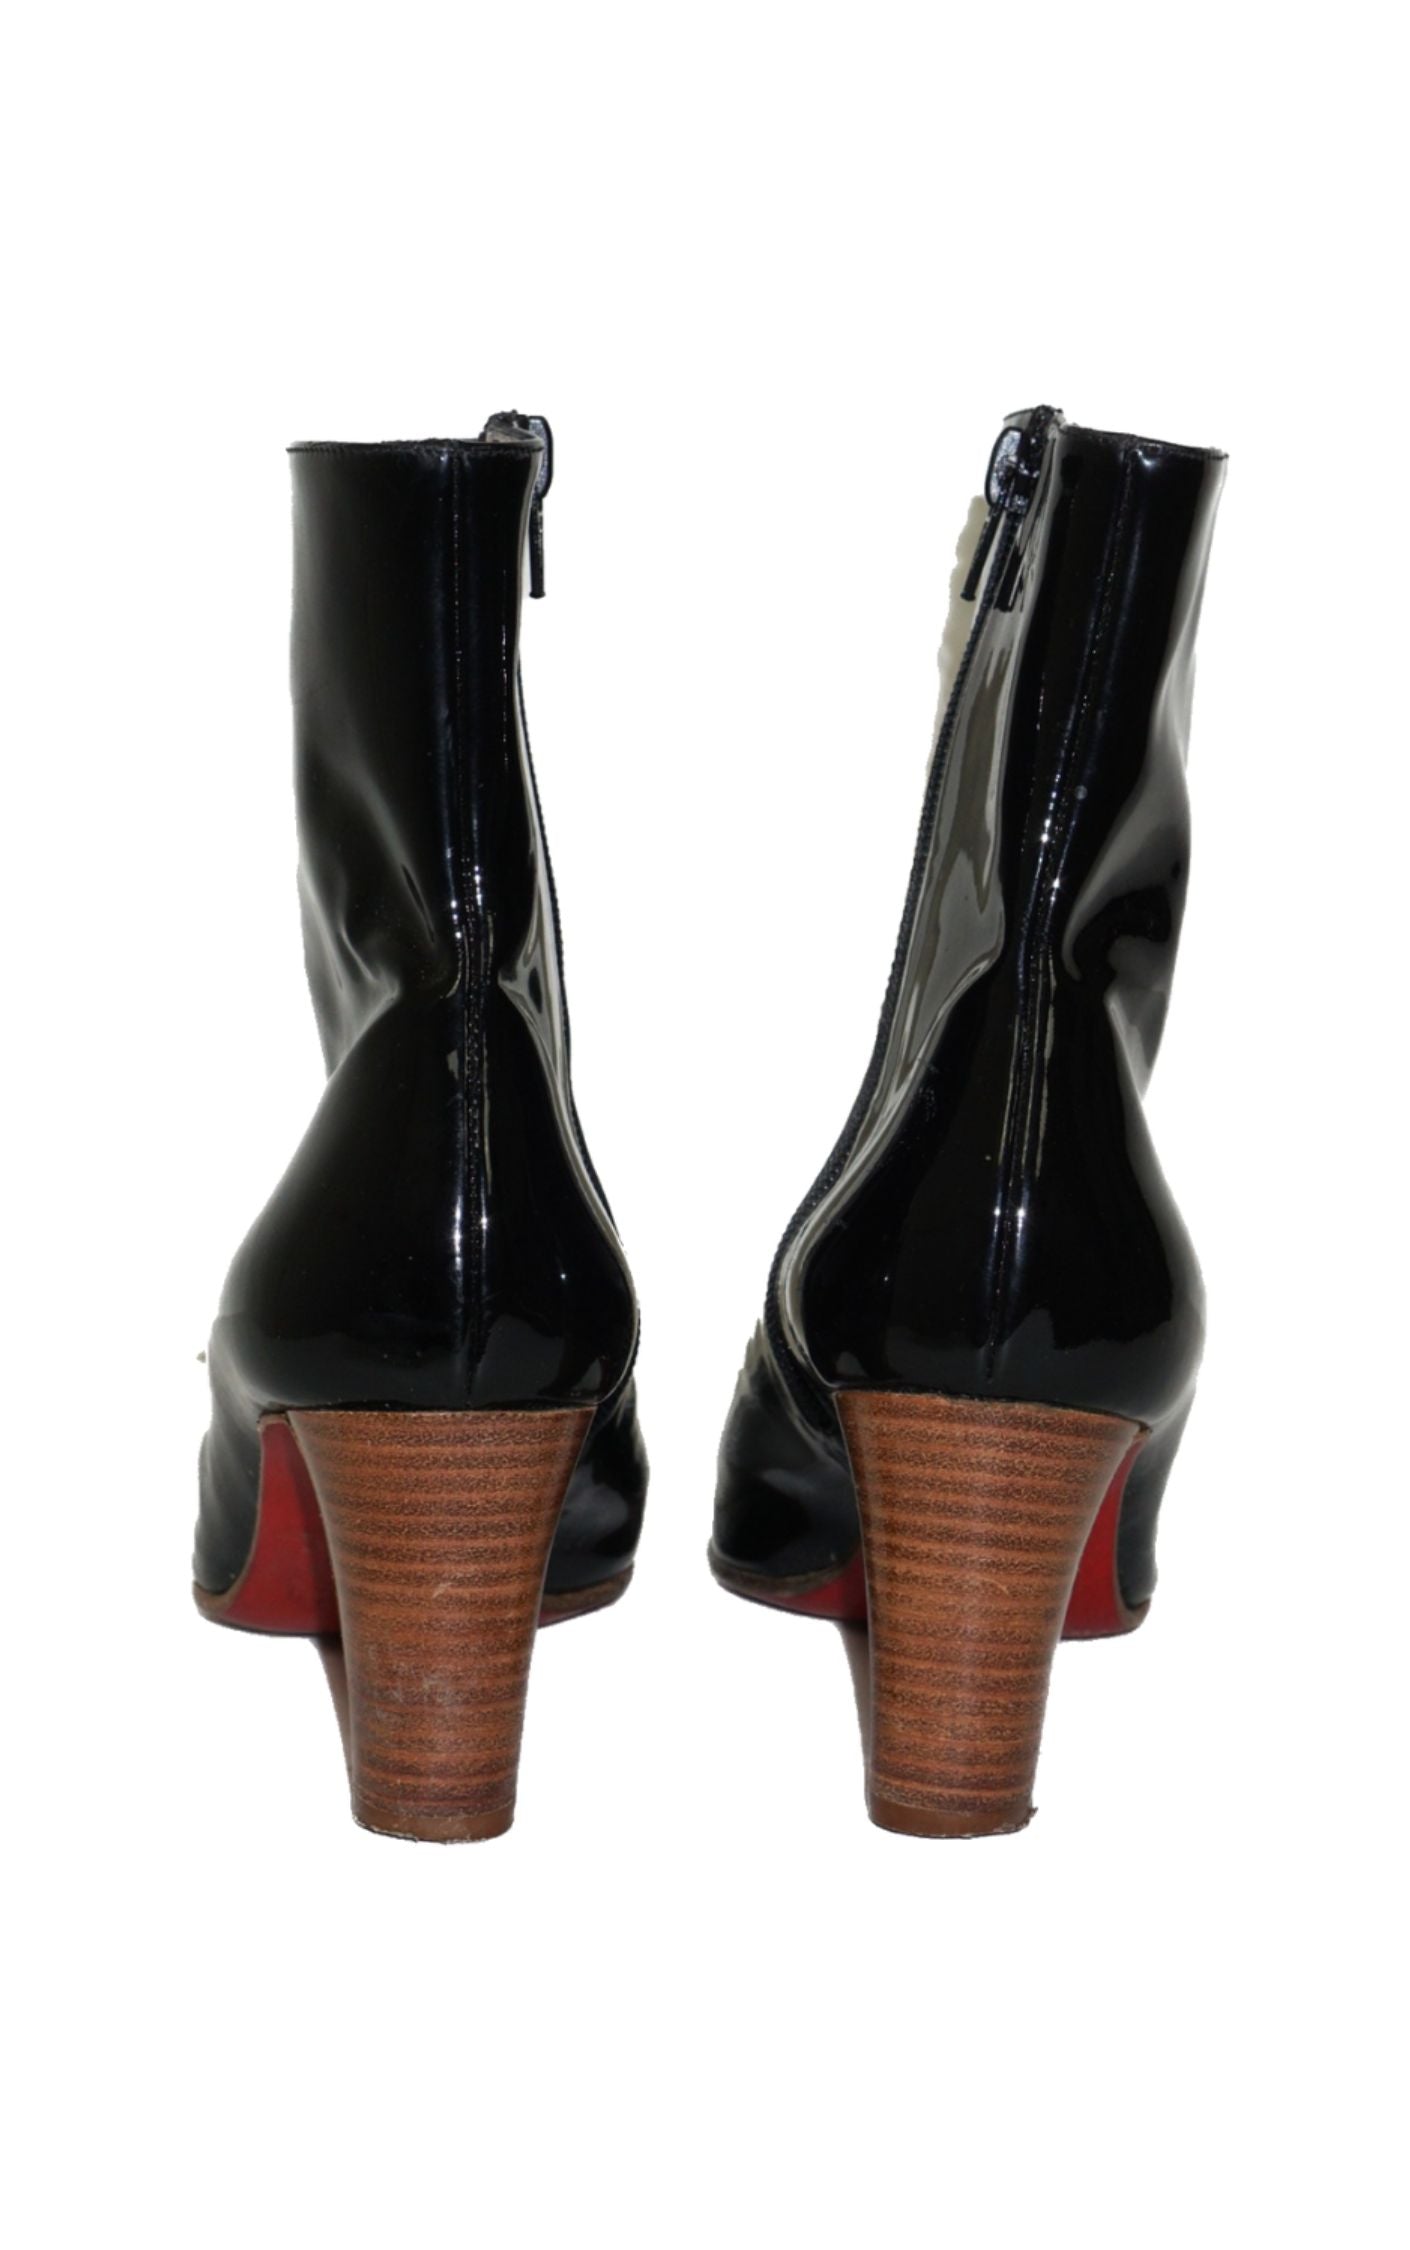 CHRISTIAN LOUBOUTIN Patent Leather Ankle Boots resellum